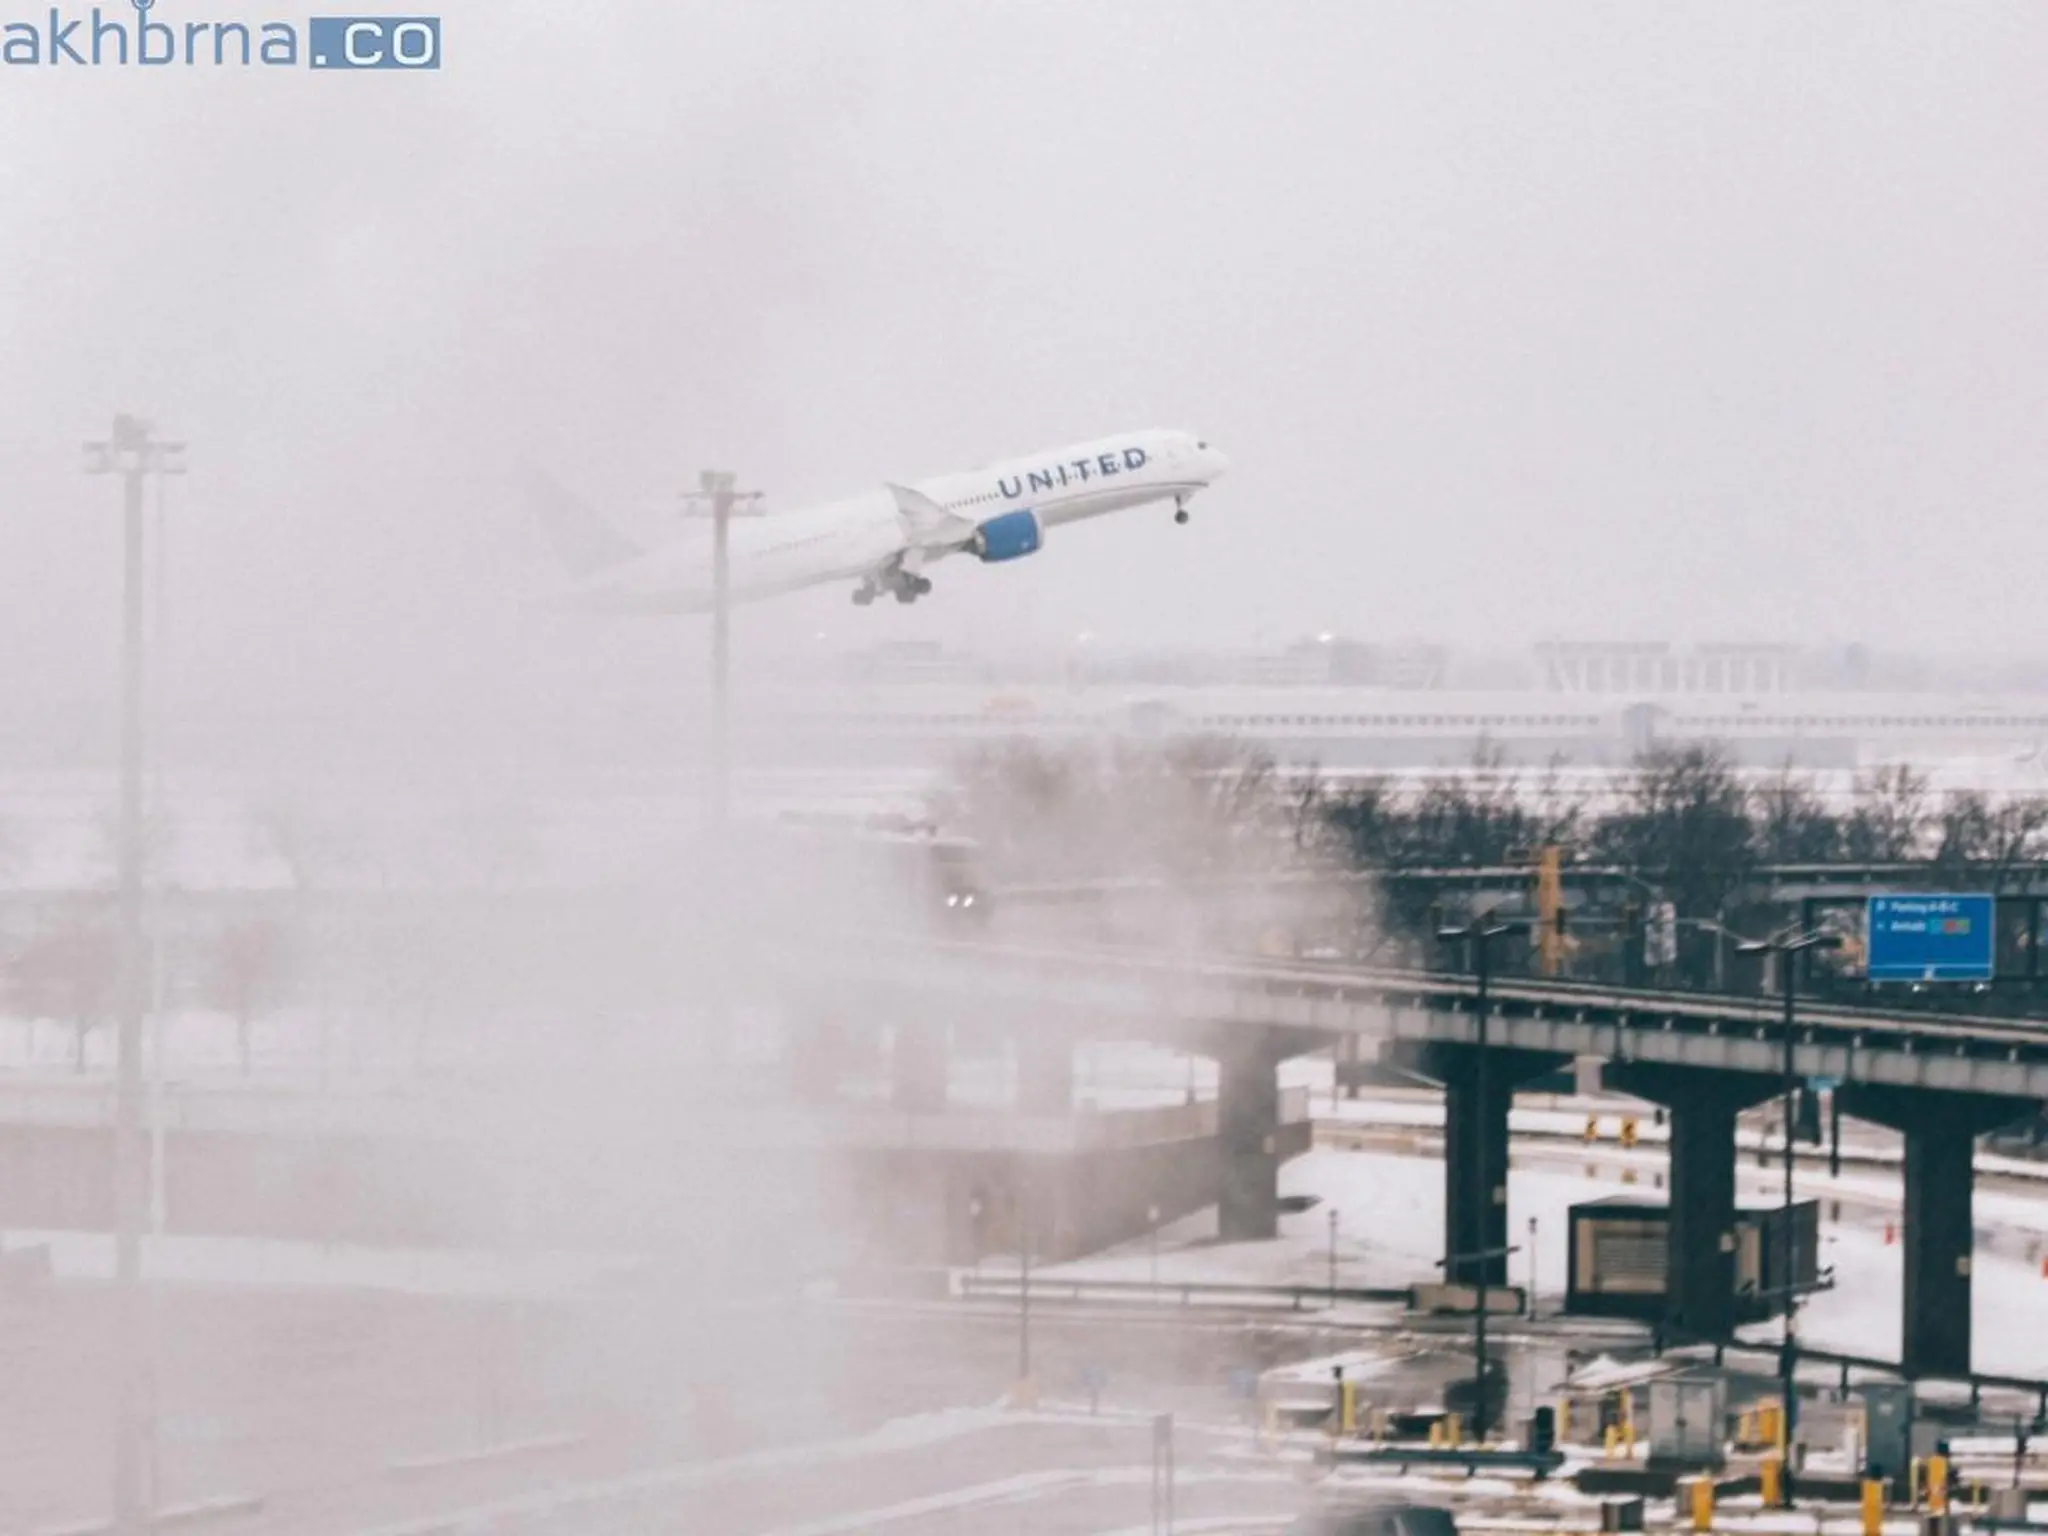 US Airlines announce cancellation of over 2,000 flights due to severe weather